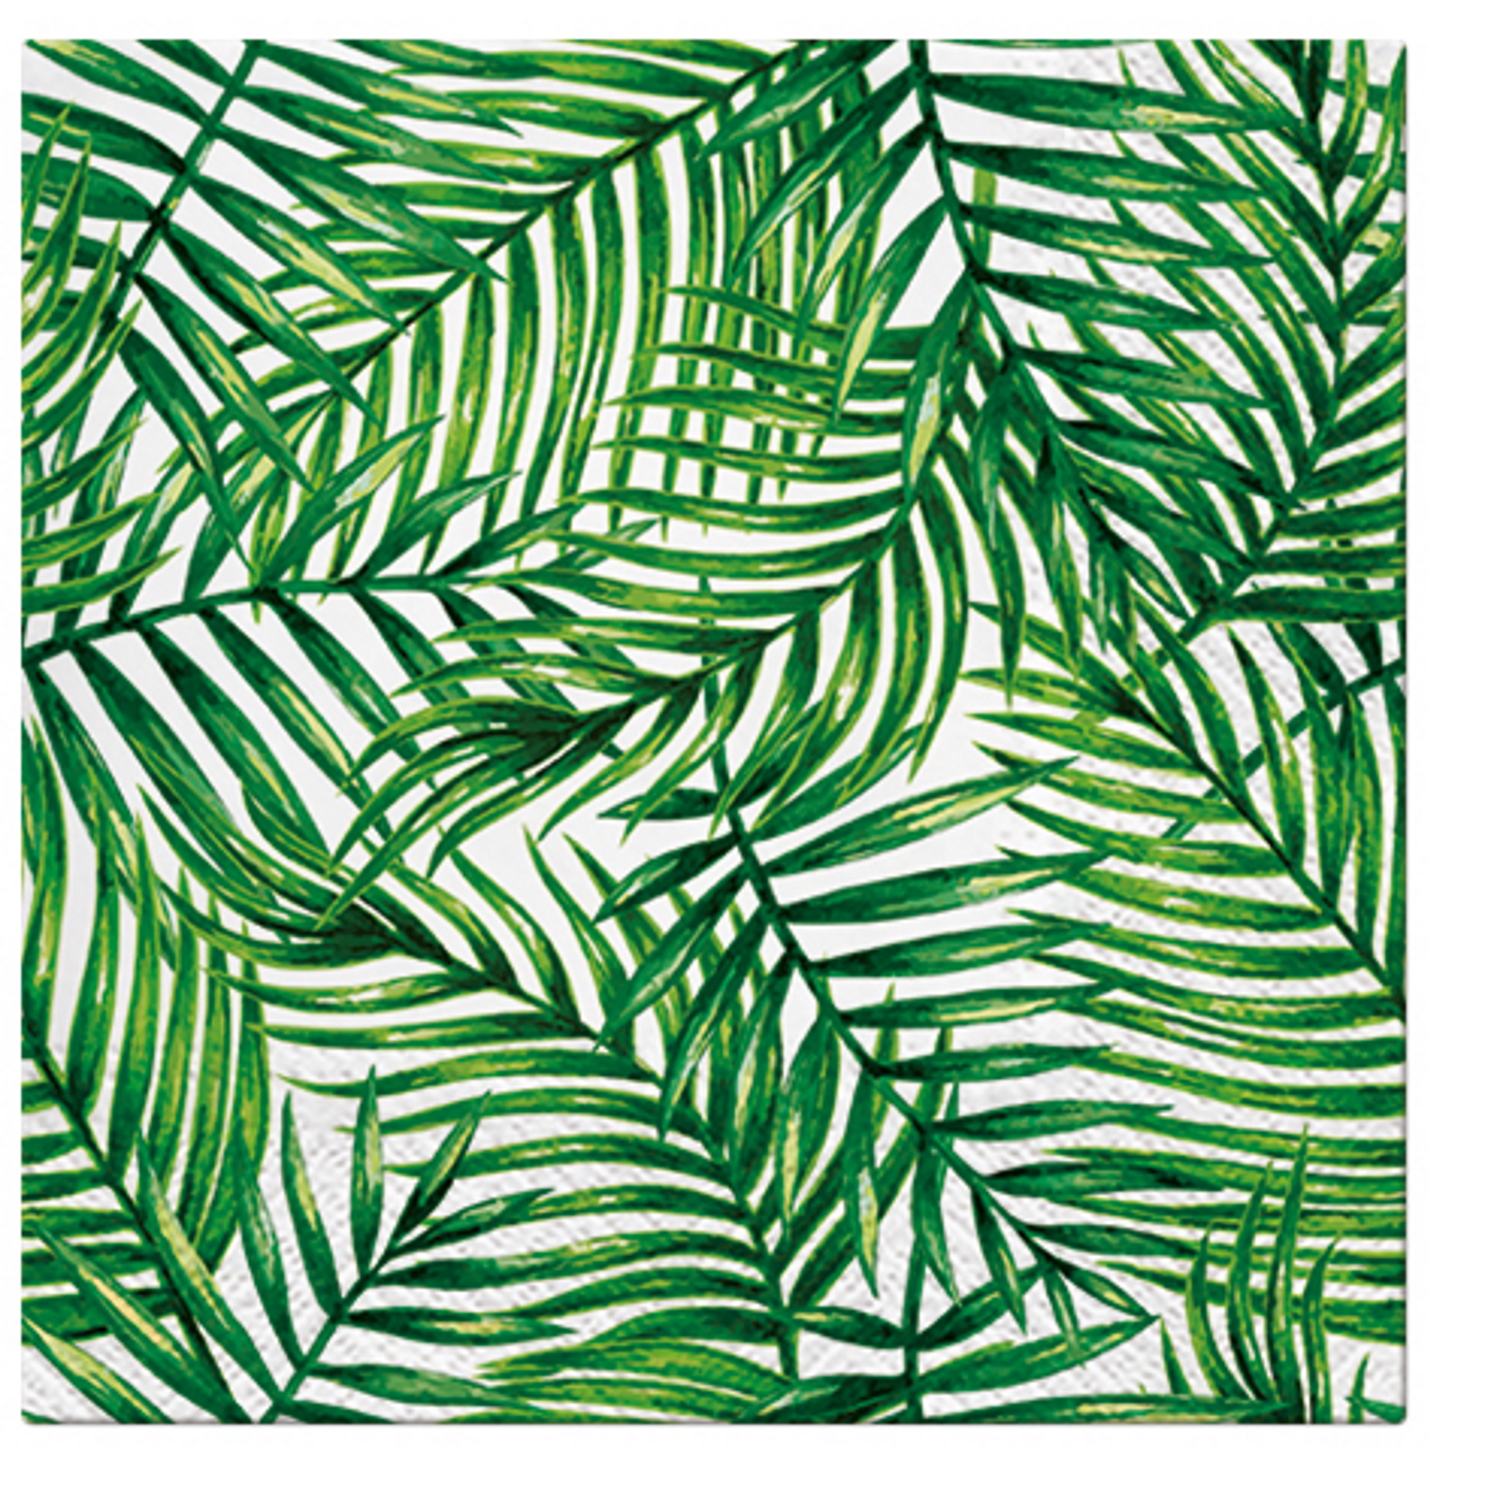 Paw Lunch Napkins 33cm TROPICAL LEAVES